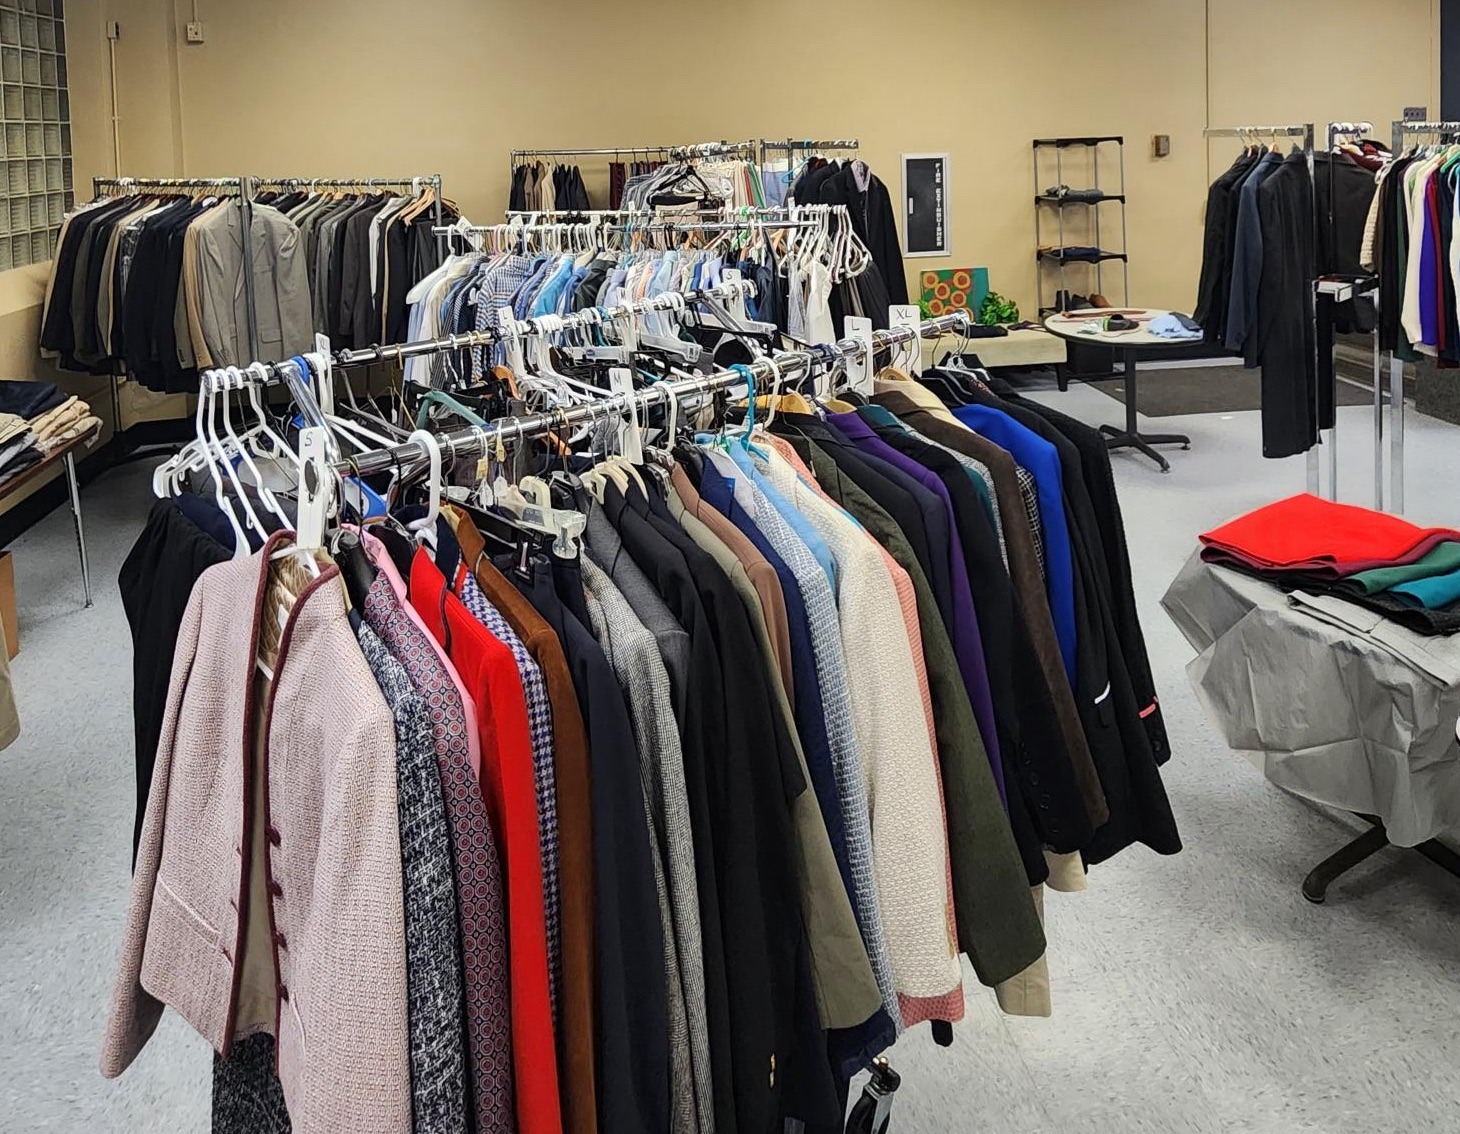 Men's and women's suits on racks at the Career Closet